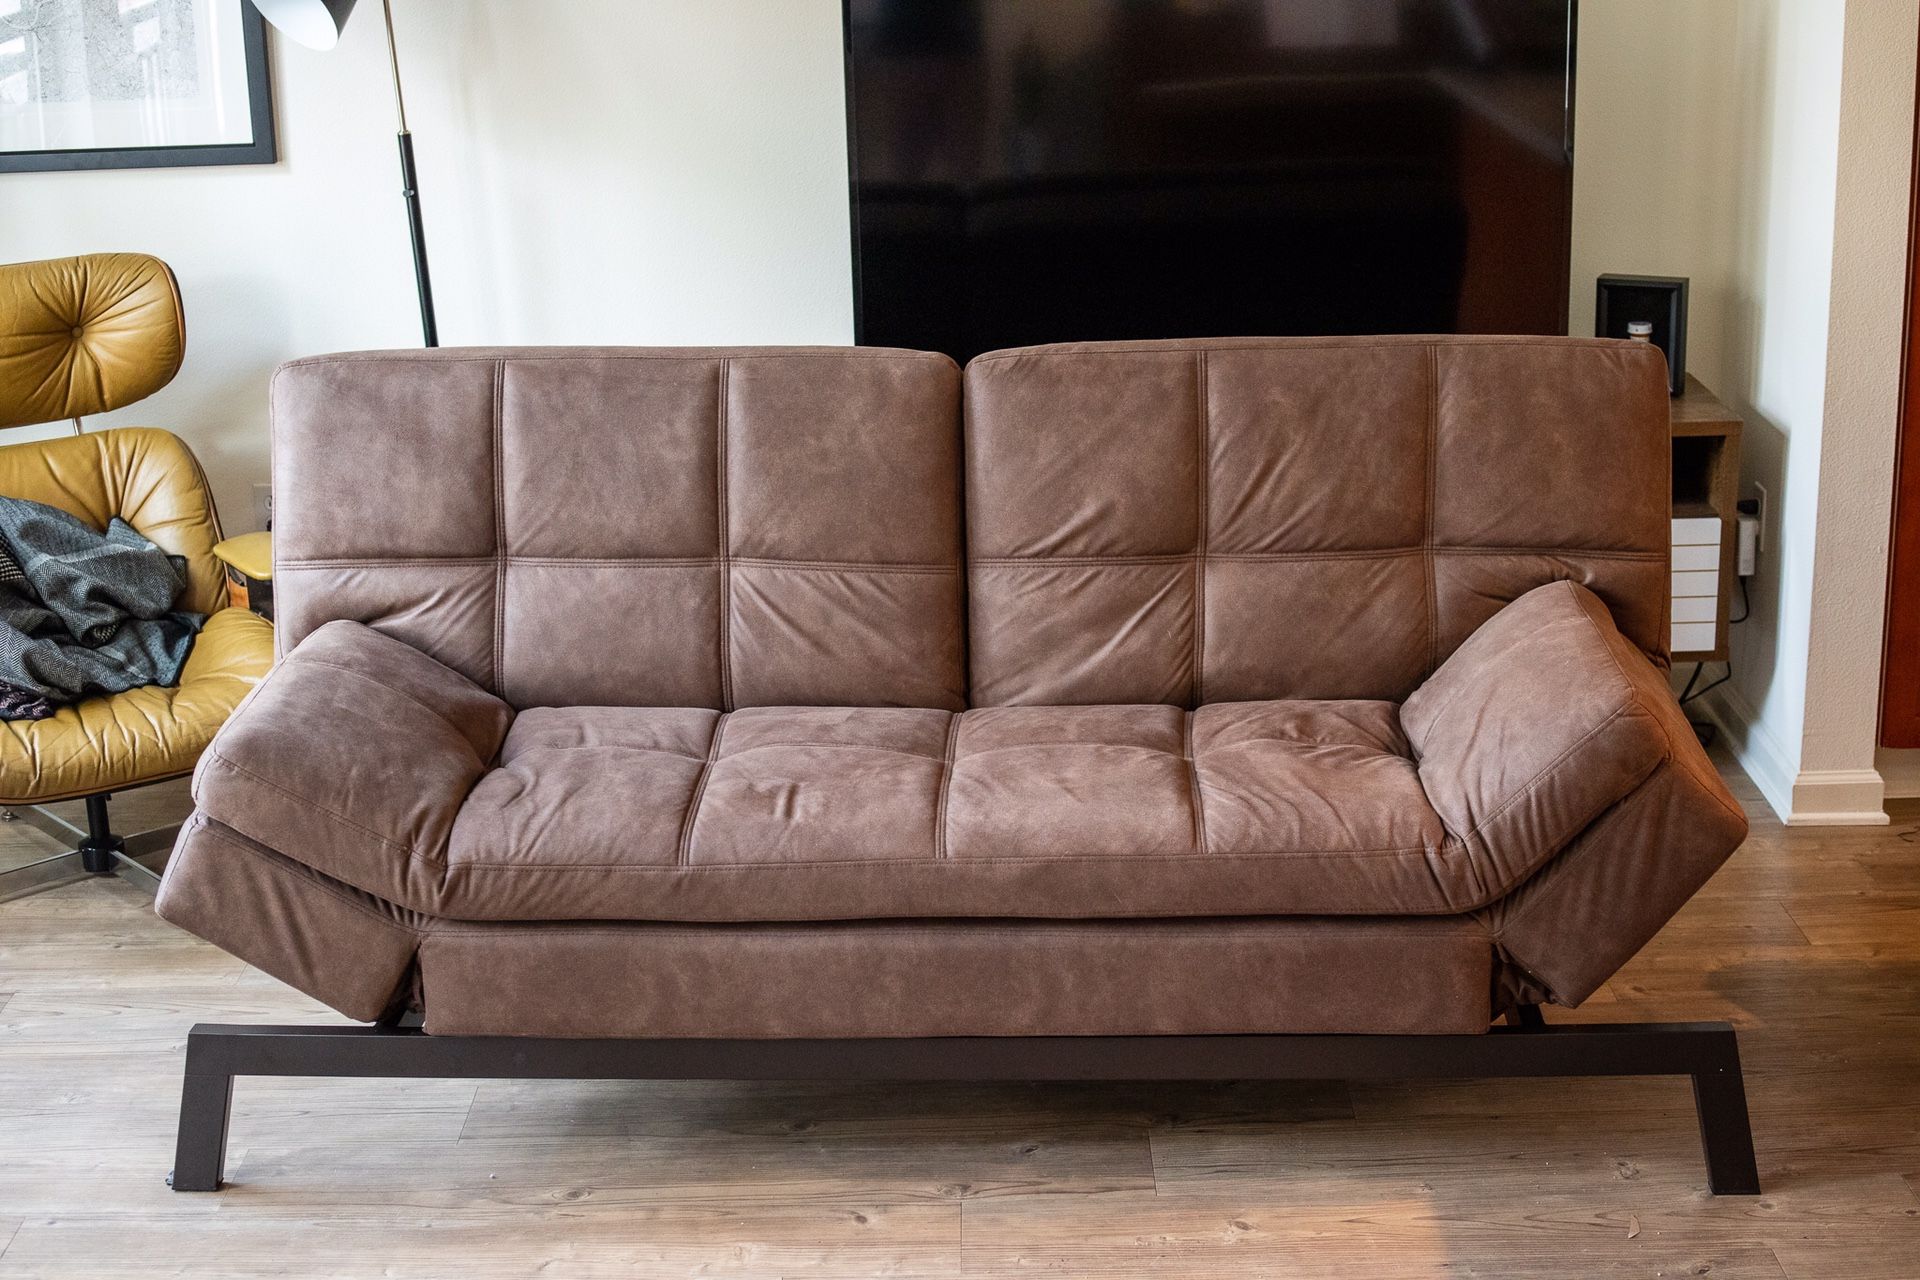 CODDLE TOGGLE CONVERTIBLE COUCH + OTTOMAN